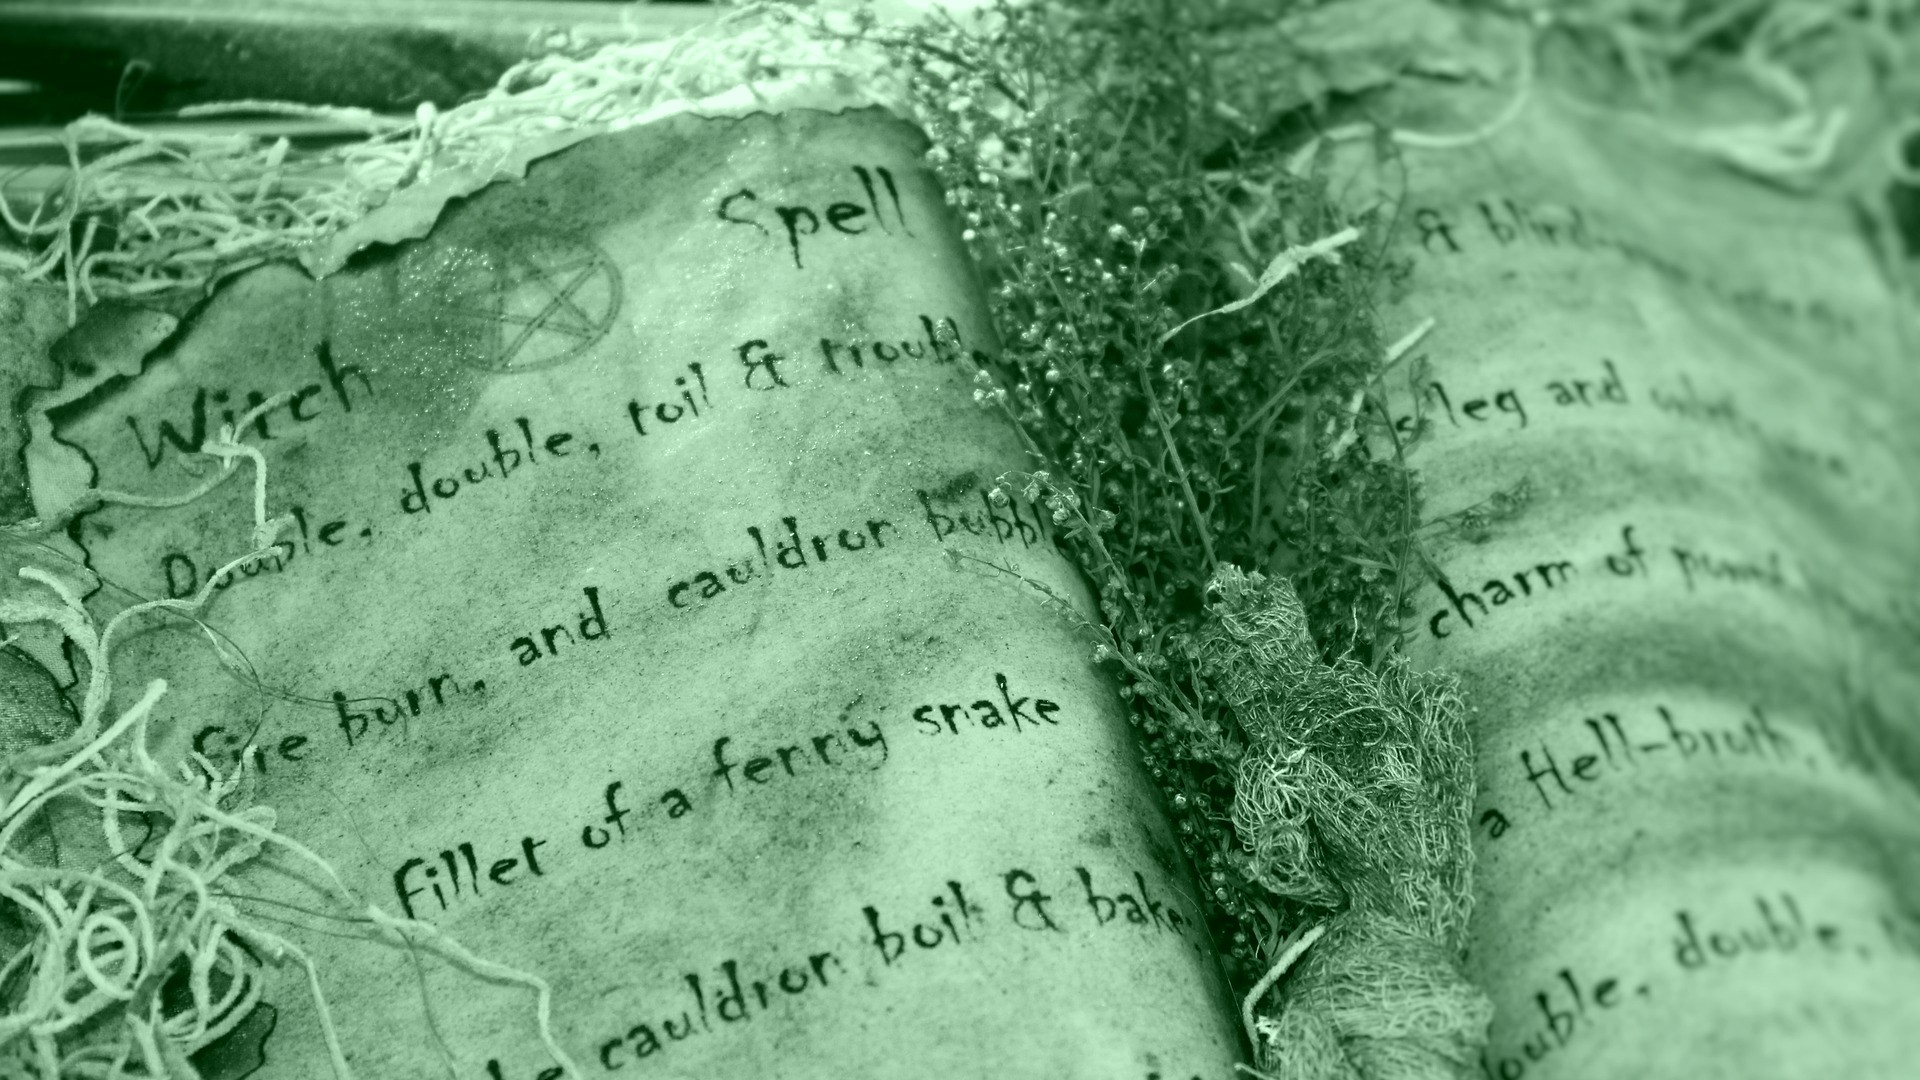 Grimoire of the Green Witches Coven. An online Coven of Witches sharing tips on Witchcraft and casting Spells that work with harm to none!